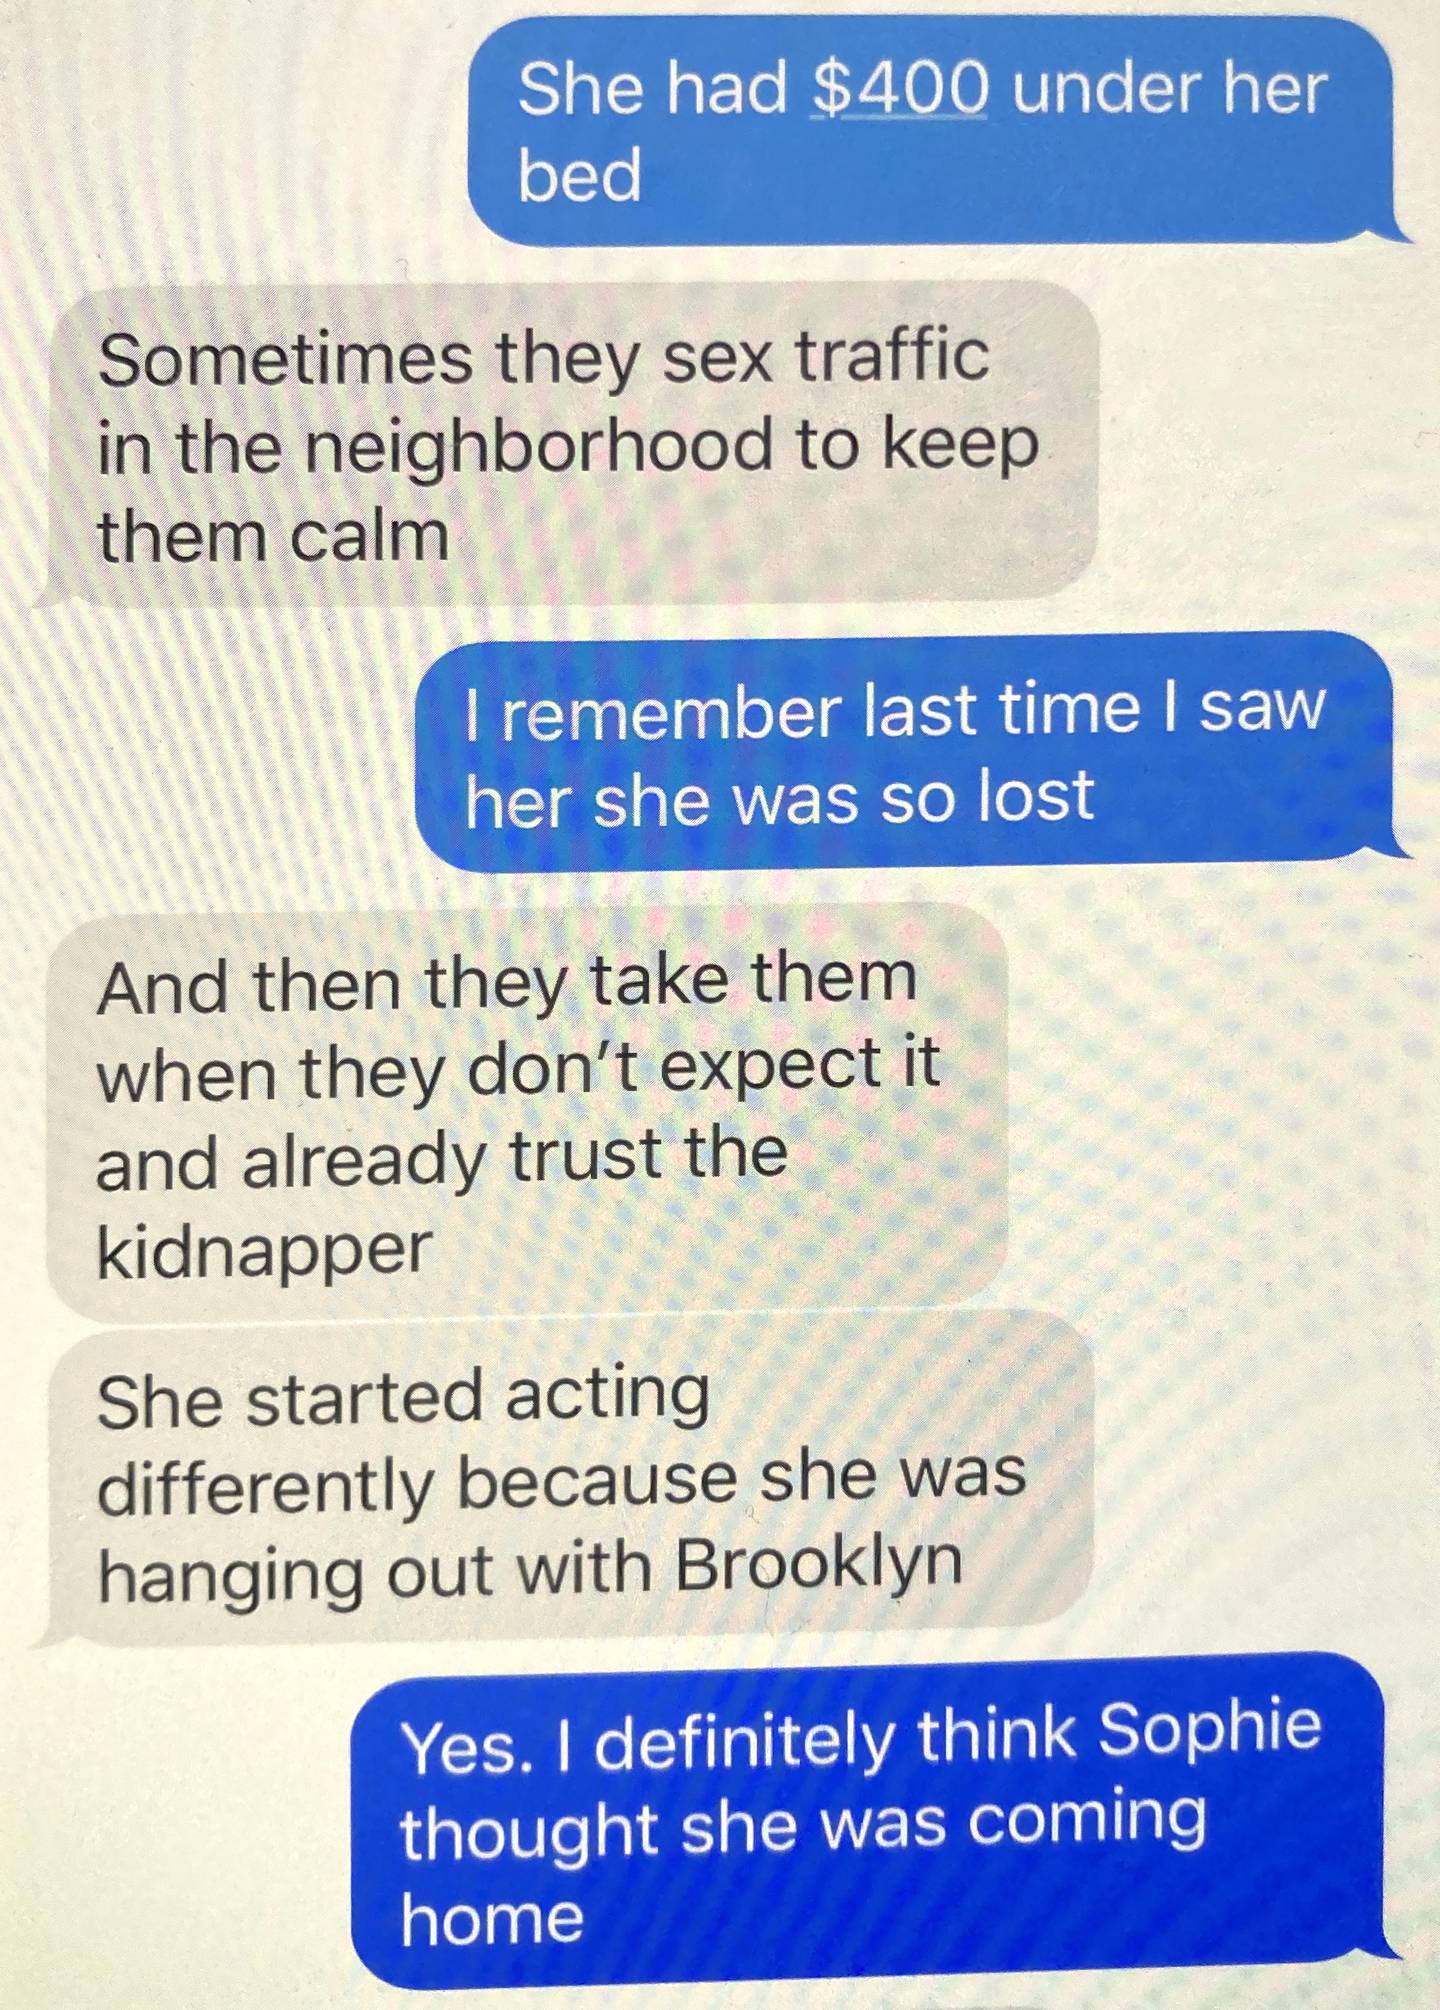 Nicole Twist turned over to police a series of text messages she exchanged with one of her daughter's friends, Tionni Mcdaniels, in April of 2021. In the texts, Mcdaniels described Sophie Reeder's behavior before she disappeared in 2017.